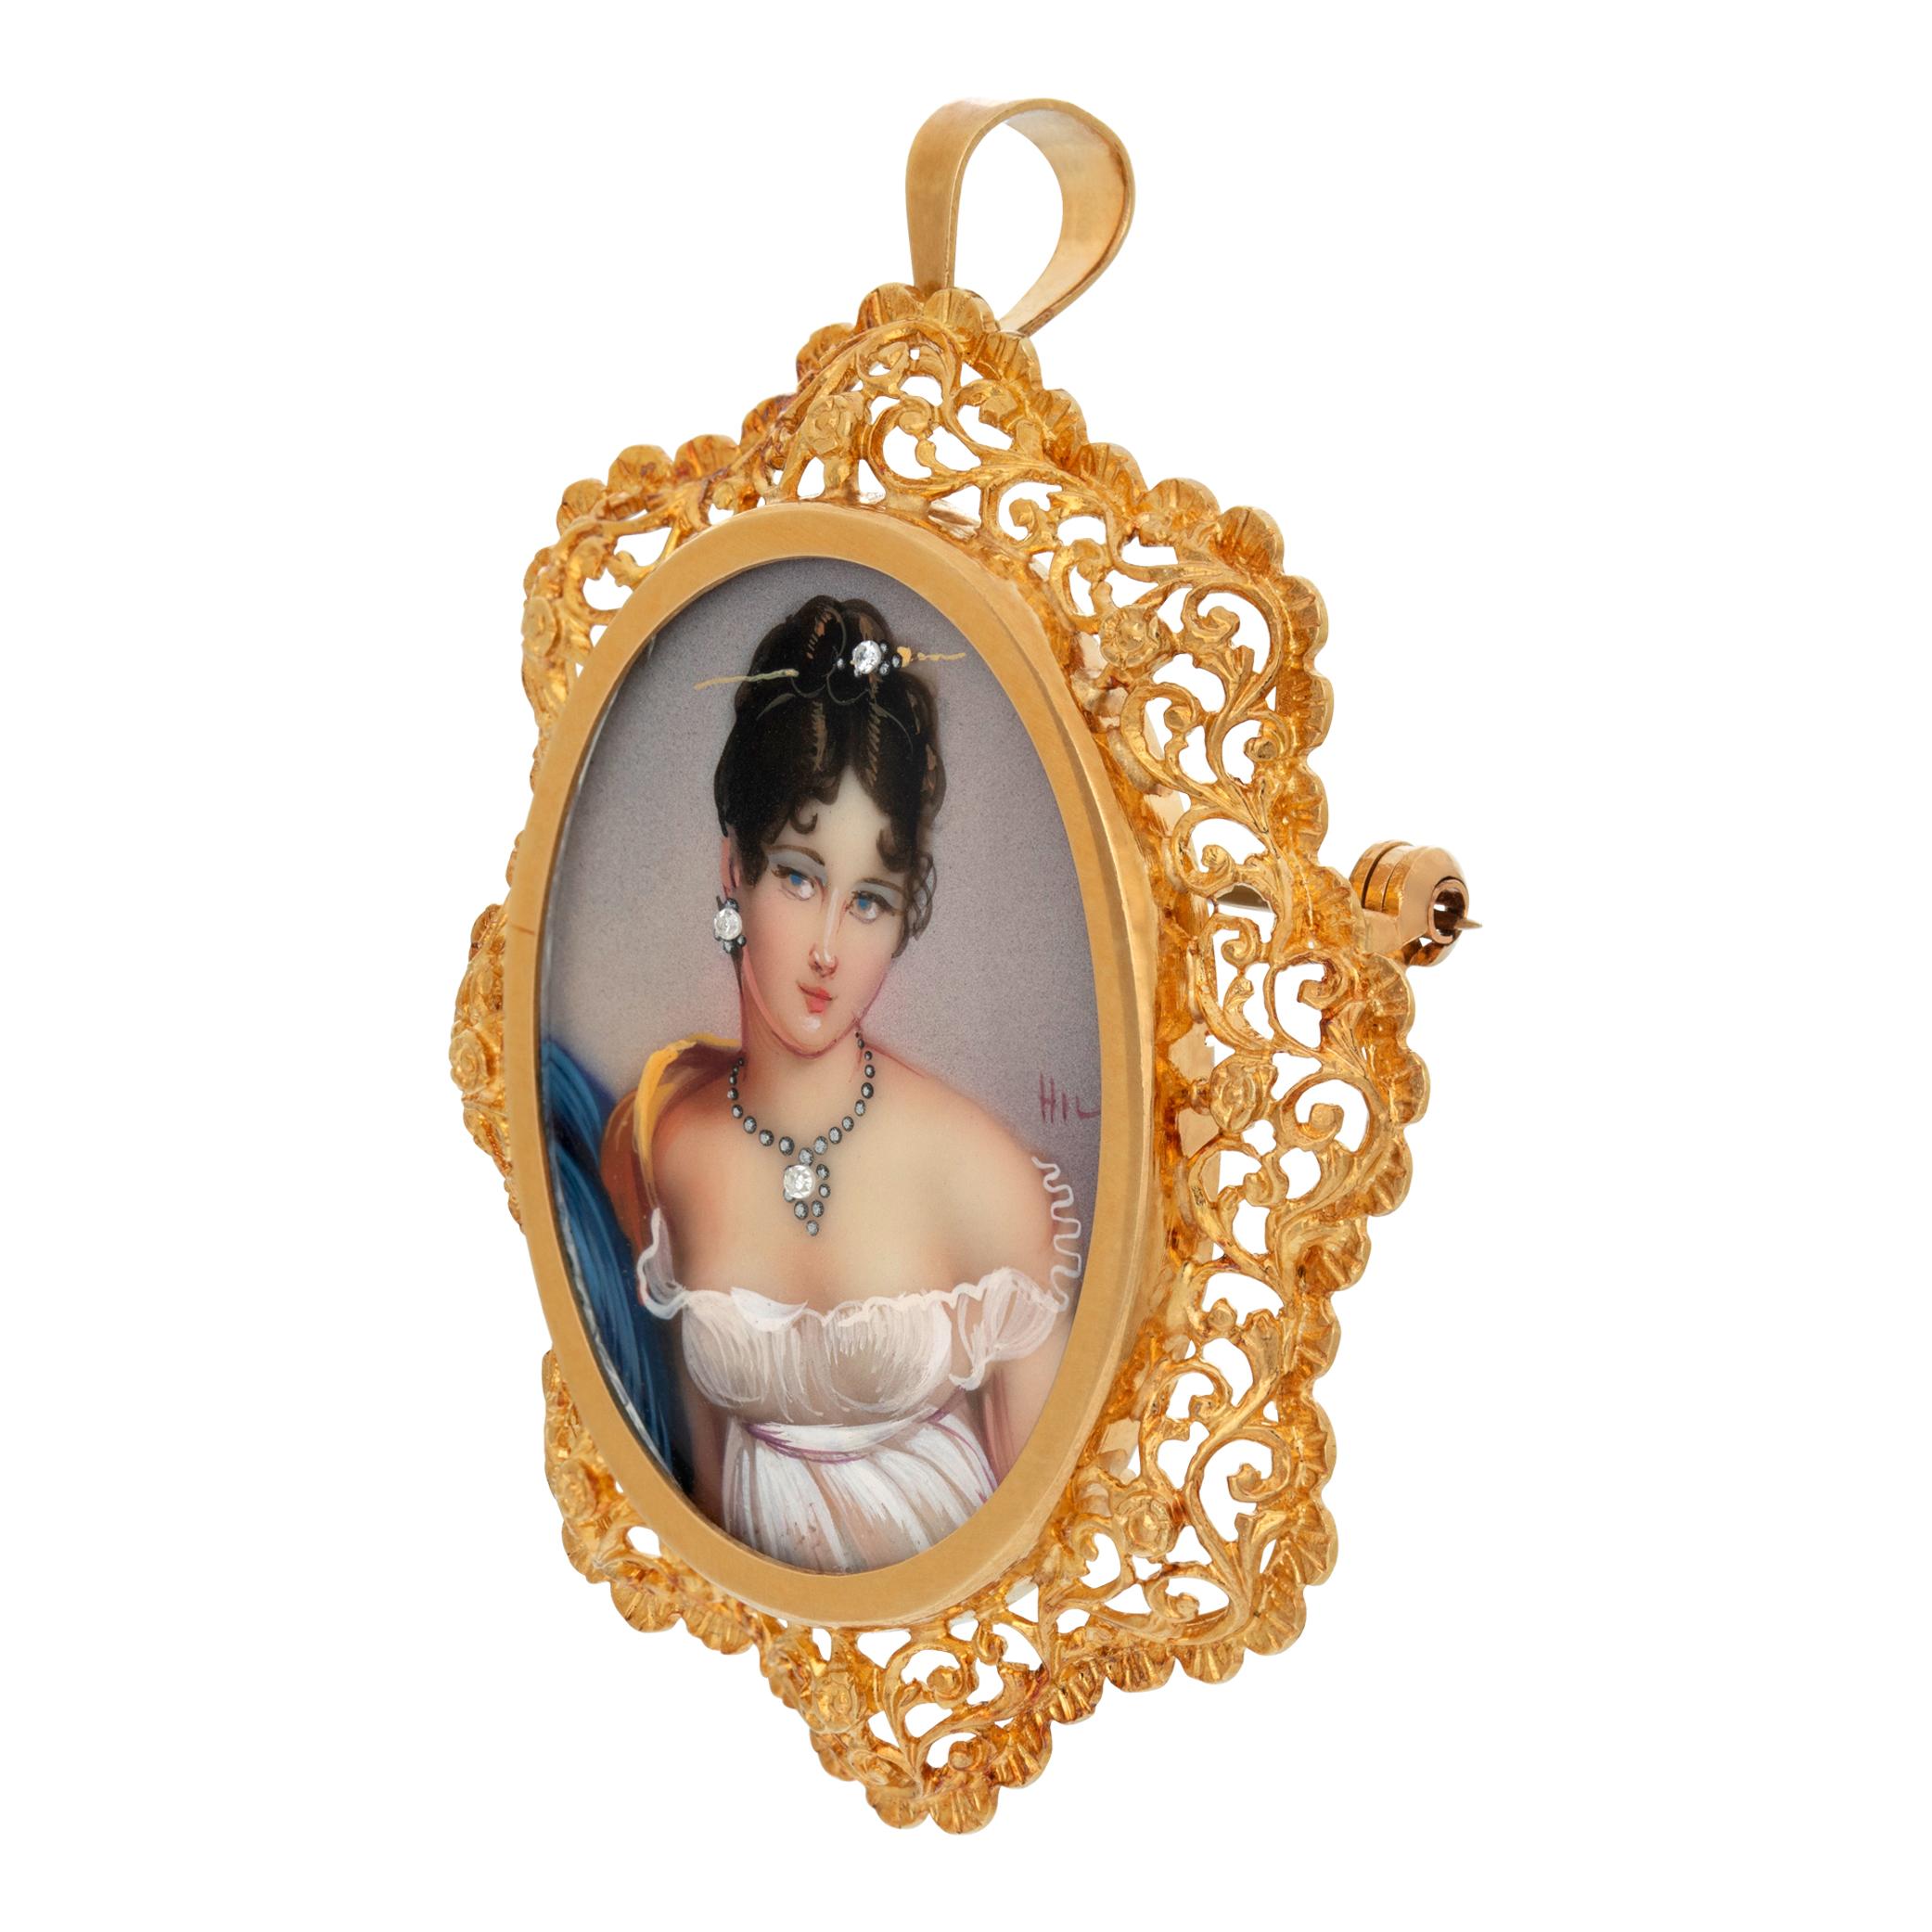 Beautiful painted portrait of a lady pendant/brooch with intricate and ornate 18k gold frame. Italian made. Signed 